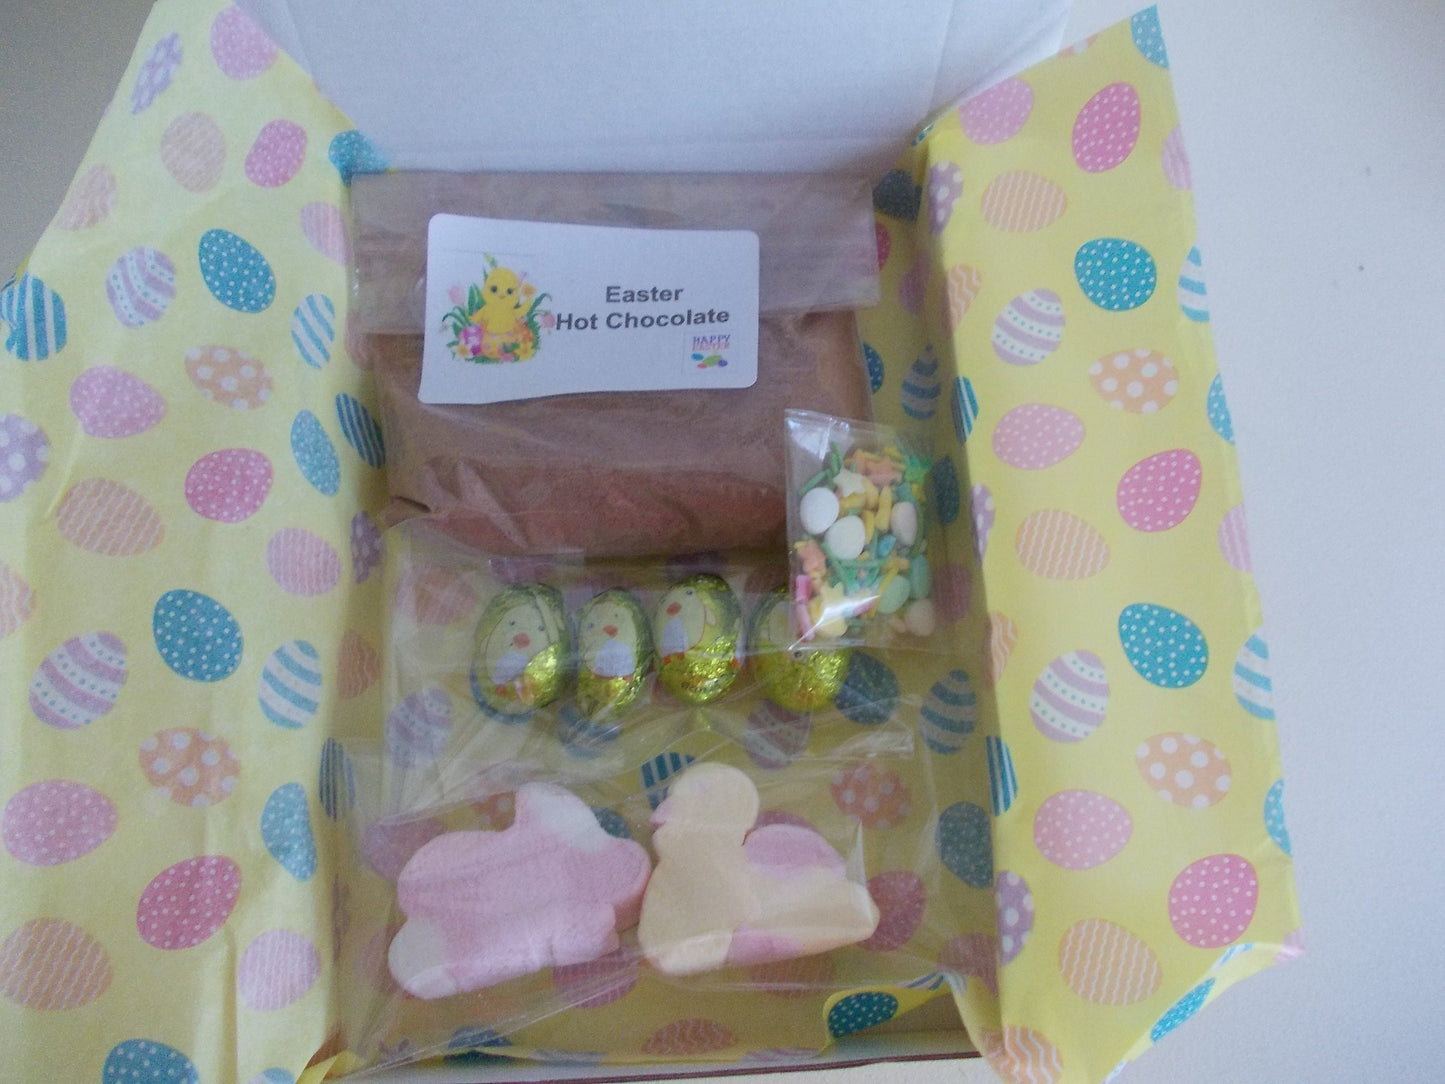 Easter Hot Chocolate letterbox giftbox, A hug in a mug for someone you love, grate Card alternative, Kids chocolate gift